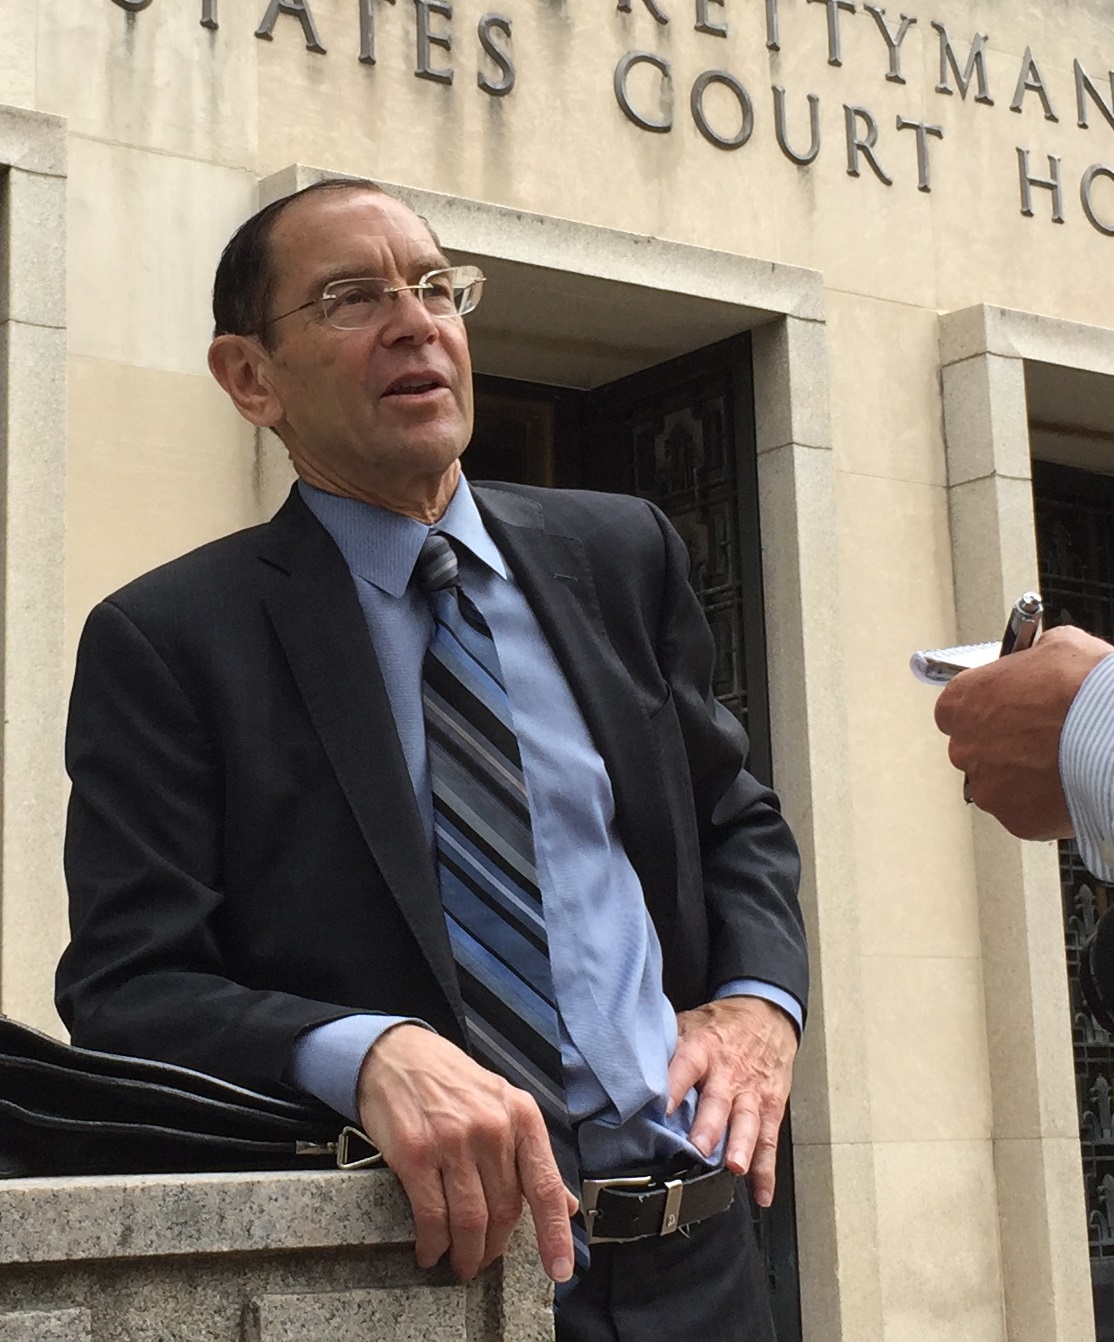 Attorney Bruce Fein being interviewed in front of U.S. District Courthouse on 9/29/15 (photo)